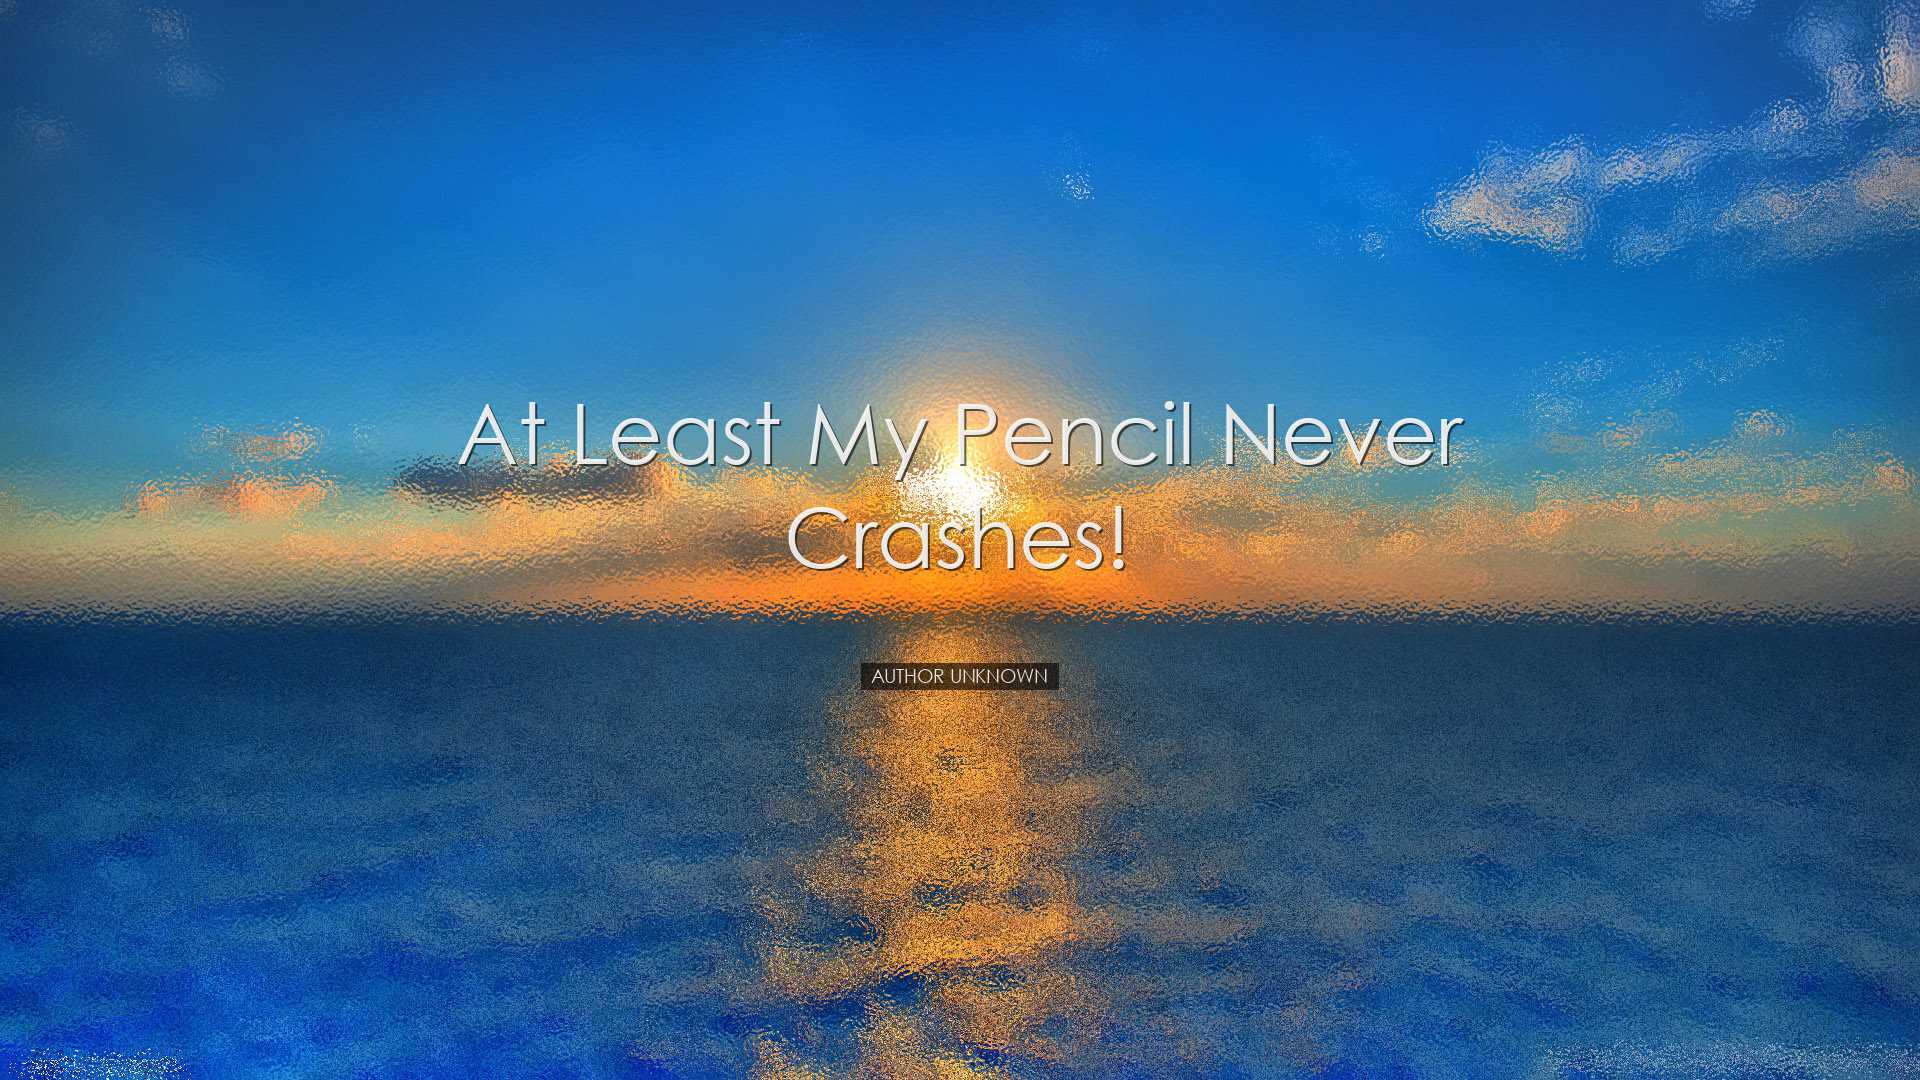 At least my pencil never crashes! - Author Unknown